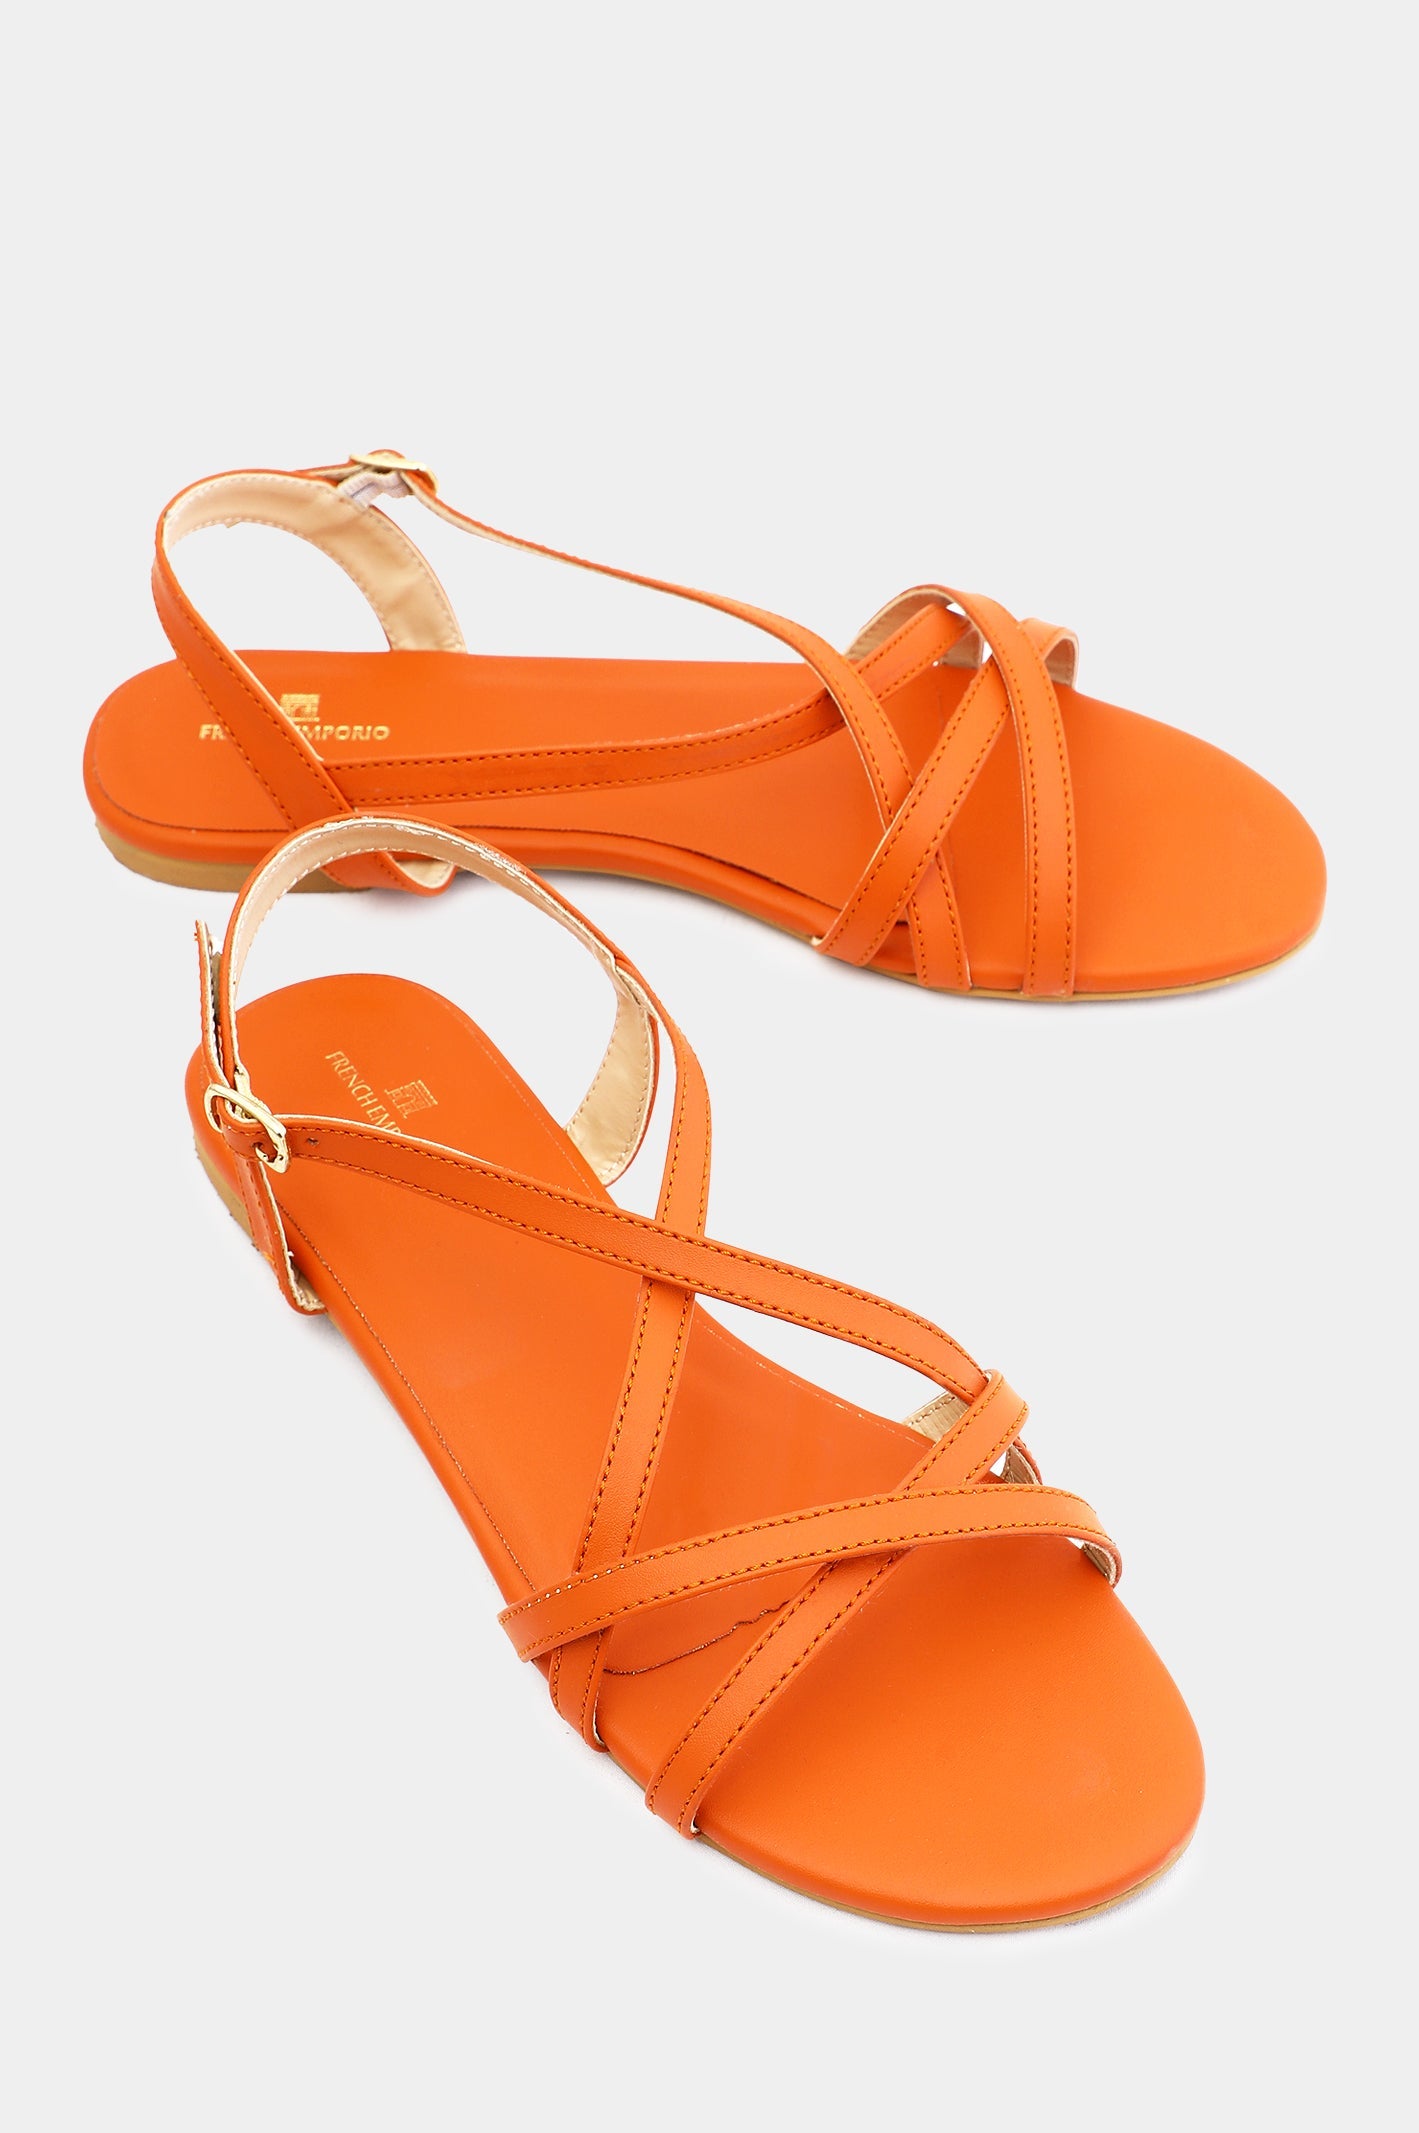 Ladies Formal Sandals From French Emporio By Diners